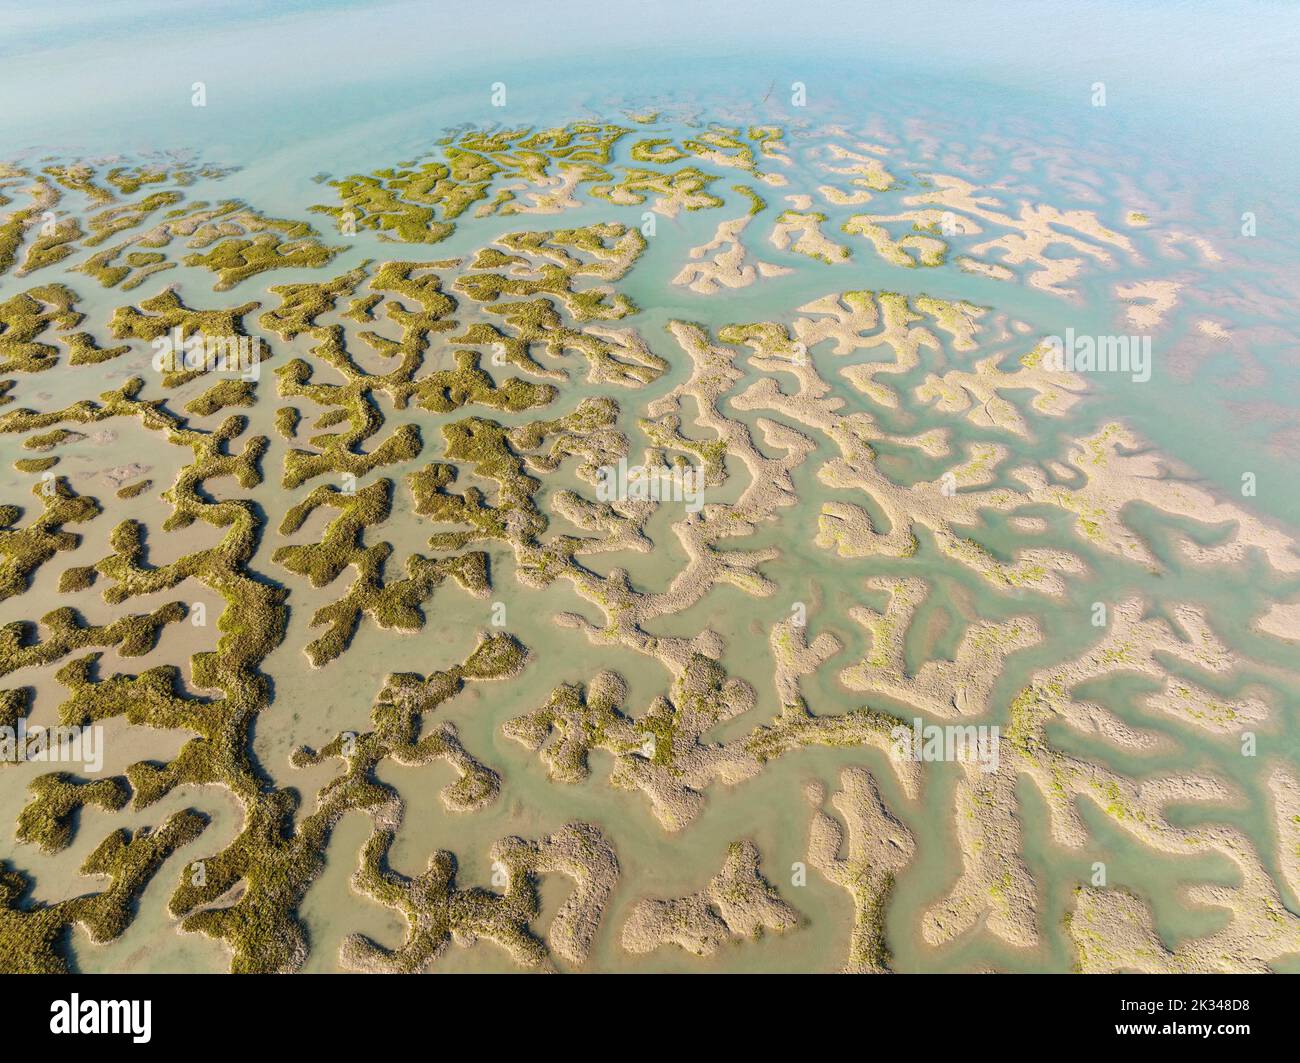 Network of channels and streams at low tide at their confluence with a larger body of water, in the marshland of the Bahia de Cadiz, aerial view Stock Photo